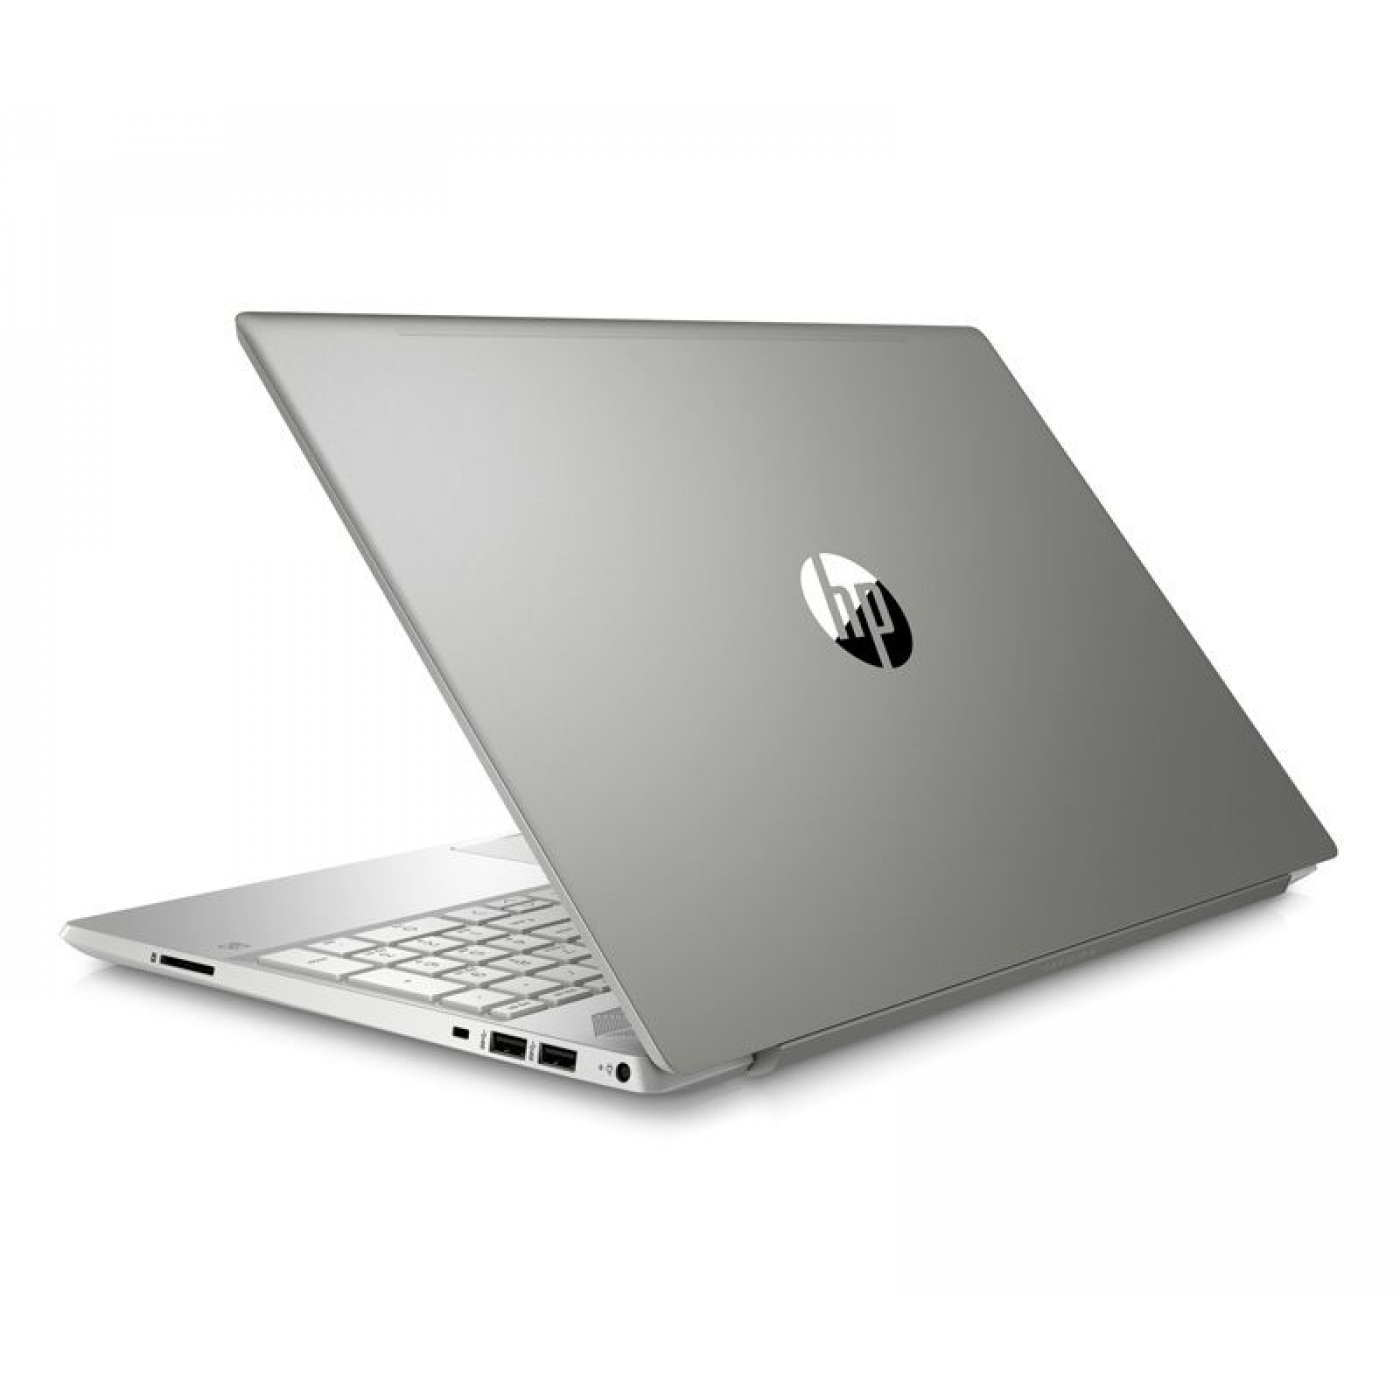 HP Pavilion 15-cs2033ni i7-8565U 128GB SSD + 1TB HDD, 8GB Ram, Win 10 Nvidia Graphics – March Madness Sale – Limited Stock